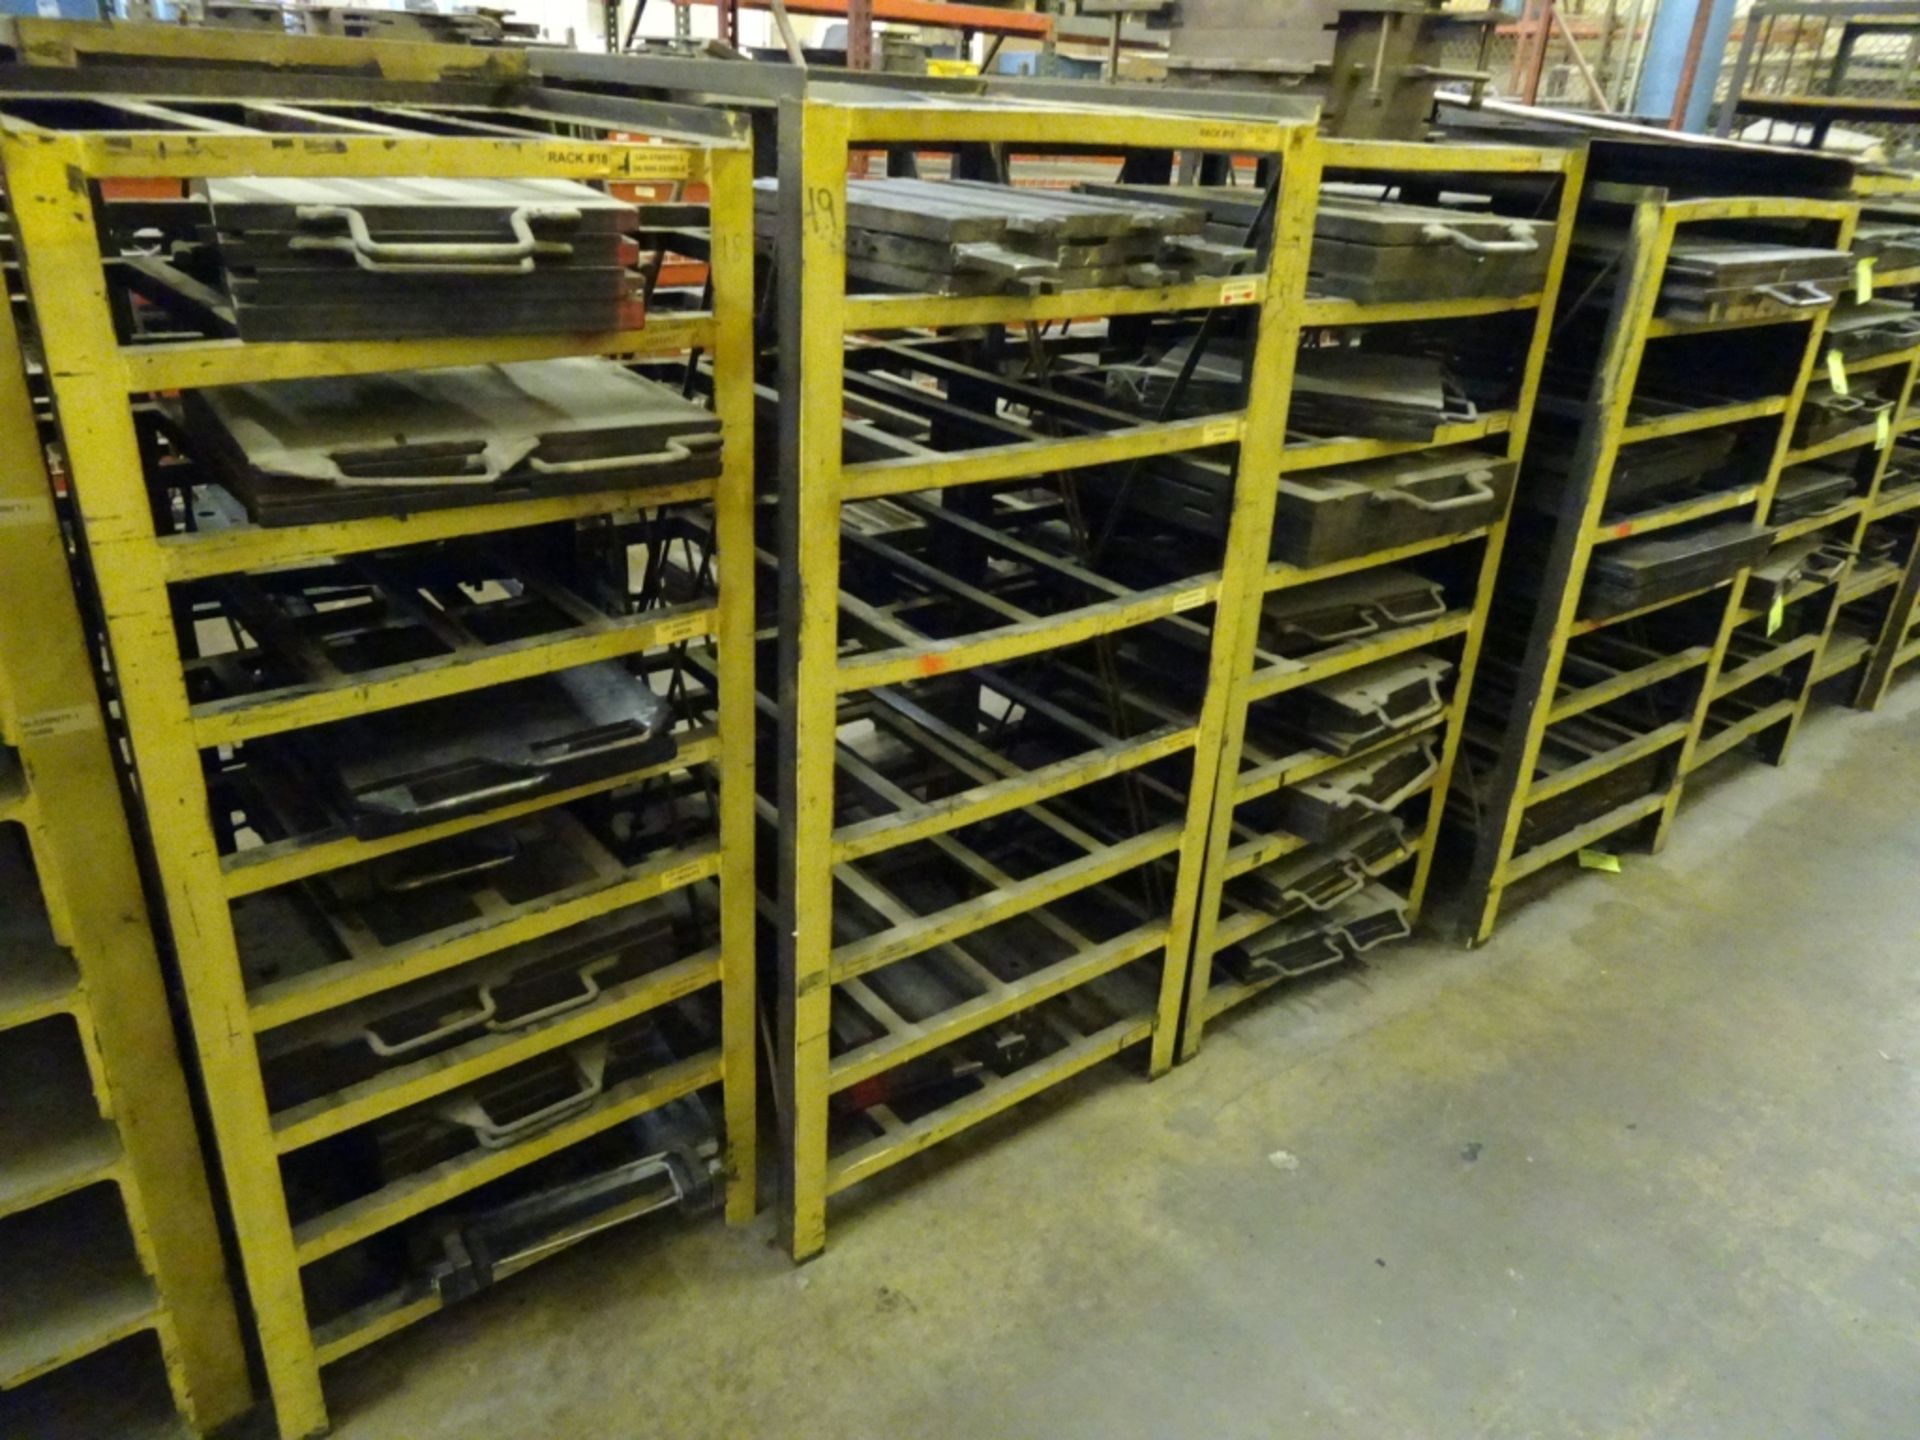 (15) Various Sized Heavy Duty Steel Mold Racks With No Contents - Image 4 of 5